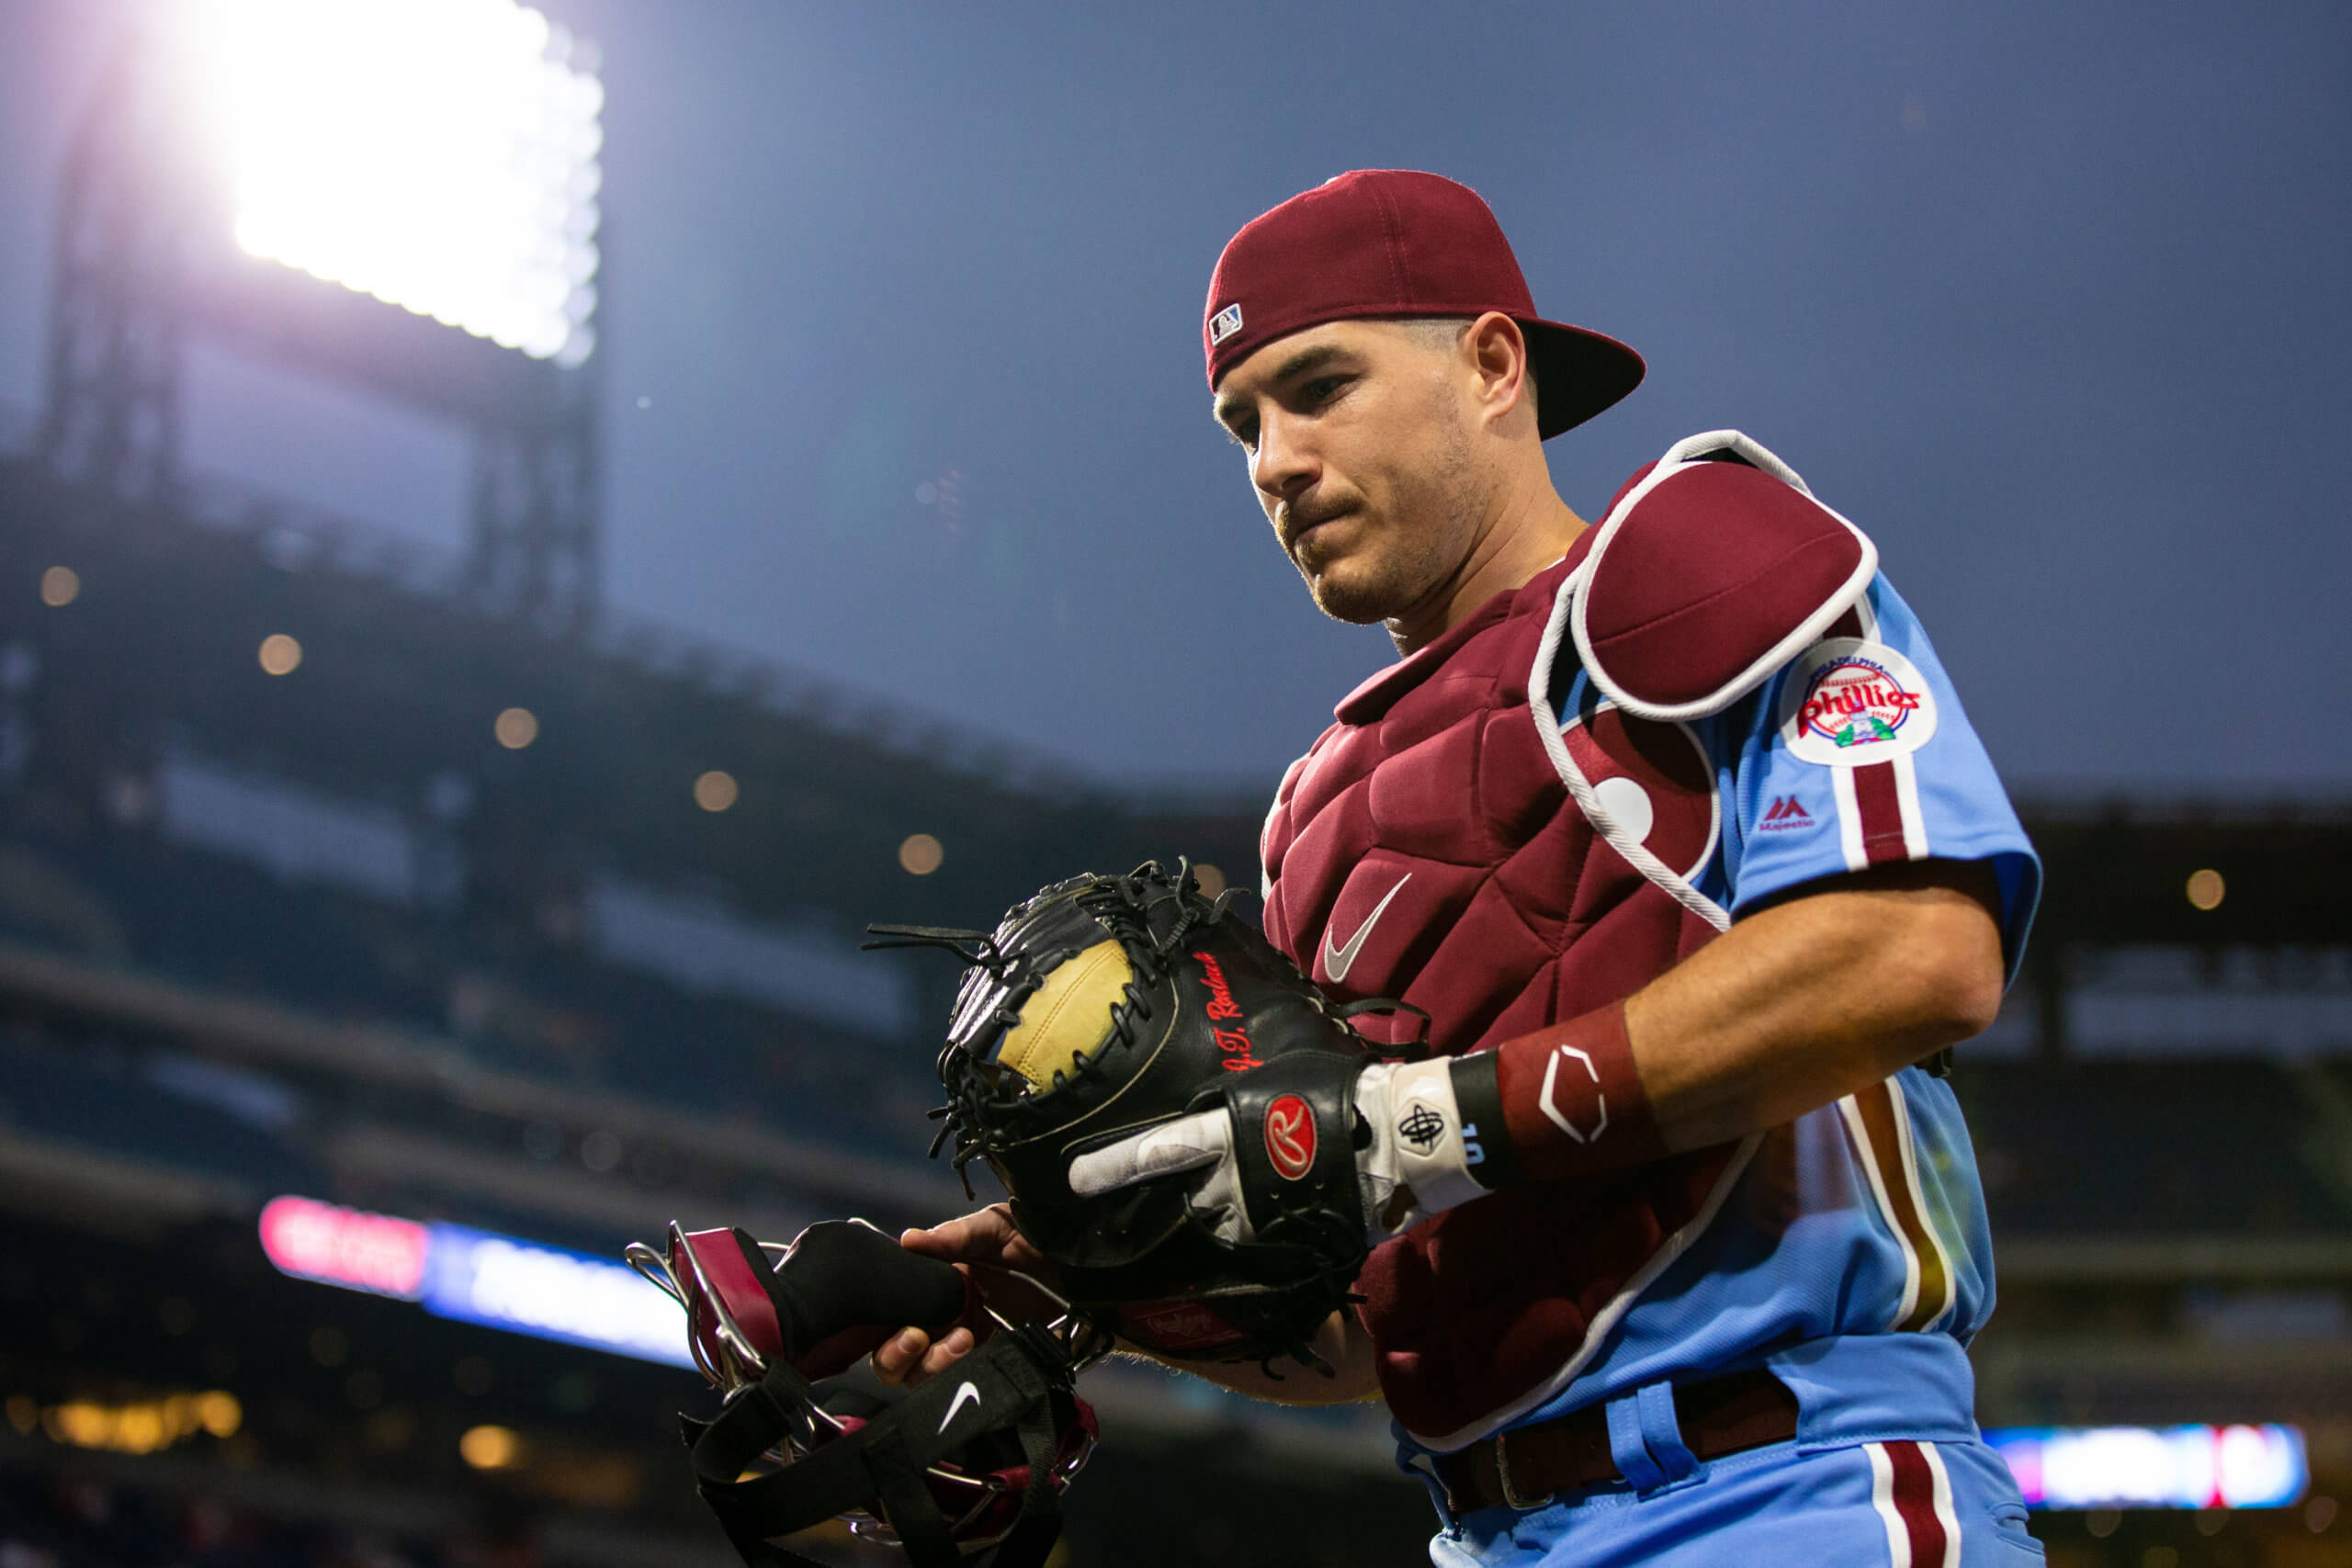 No need to panic about J.T. Realmuto